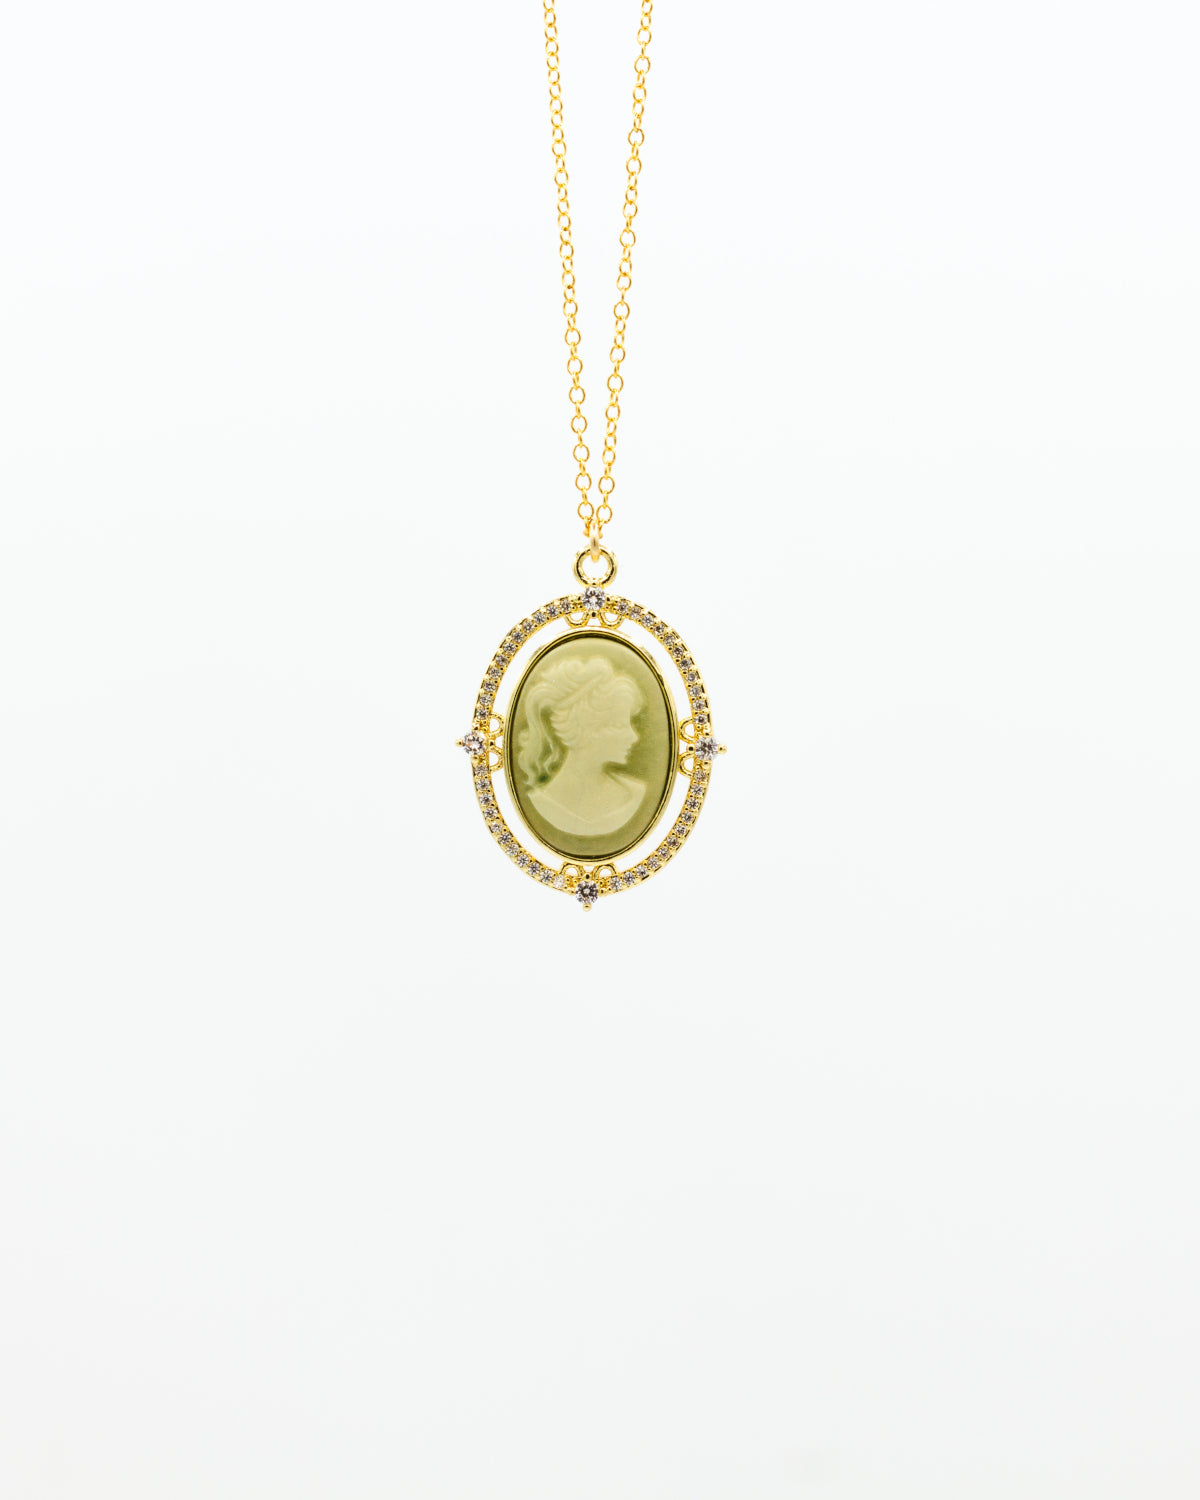 Vintage unmarked Cameo Pendant Necklace in Gold tone. 24